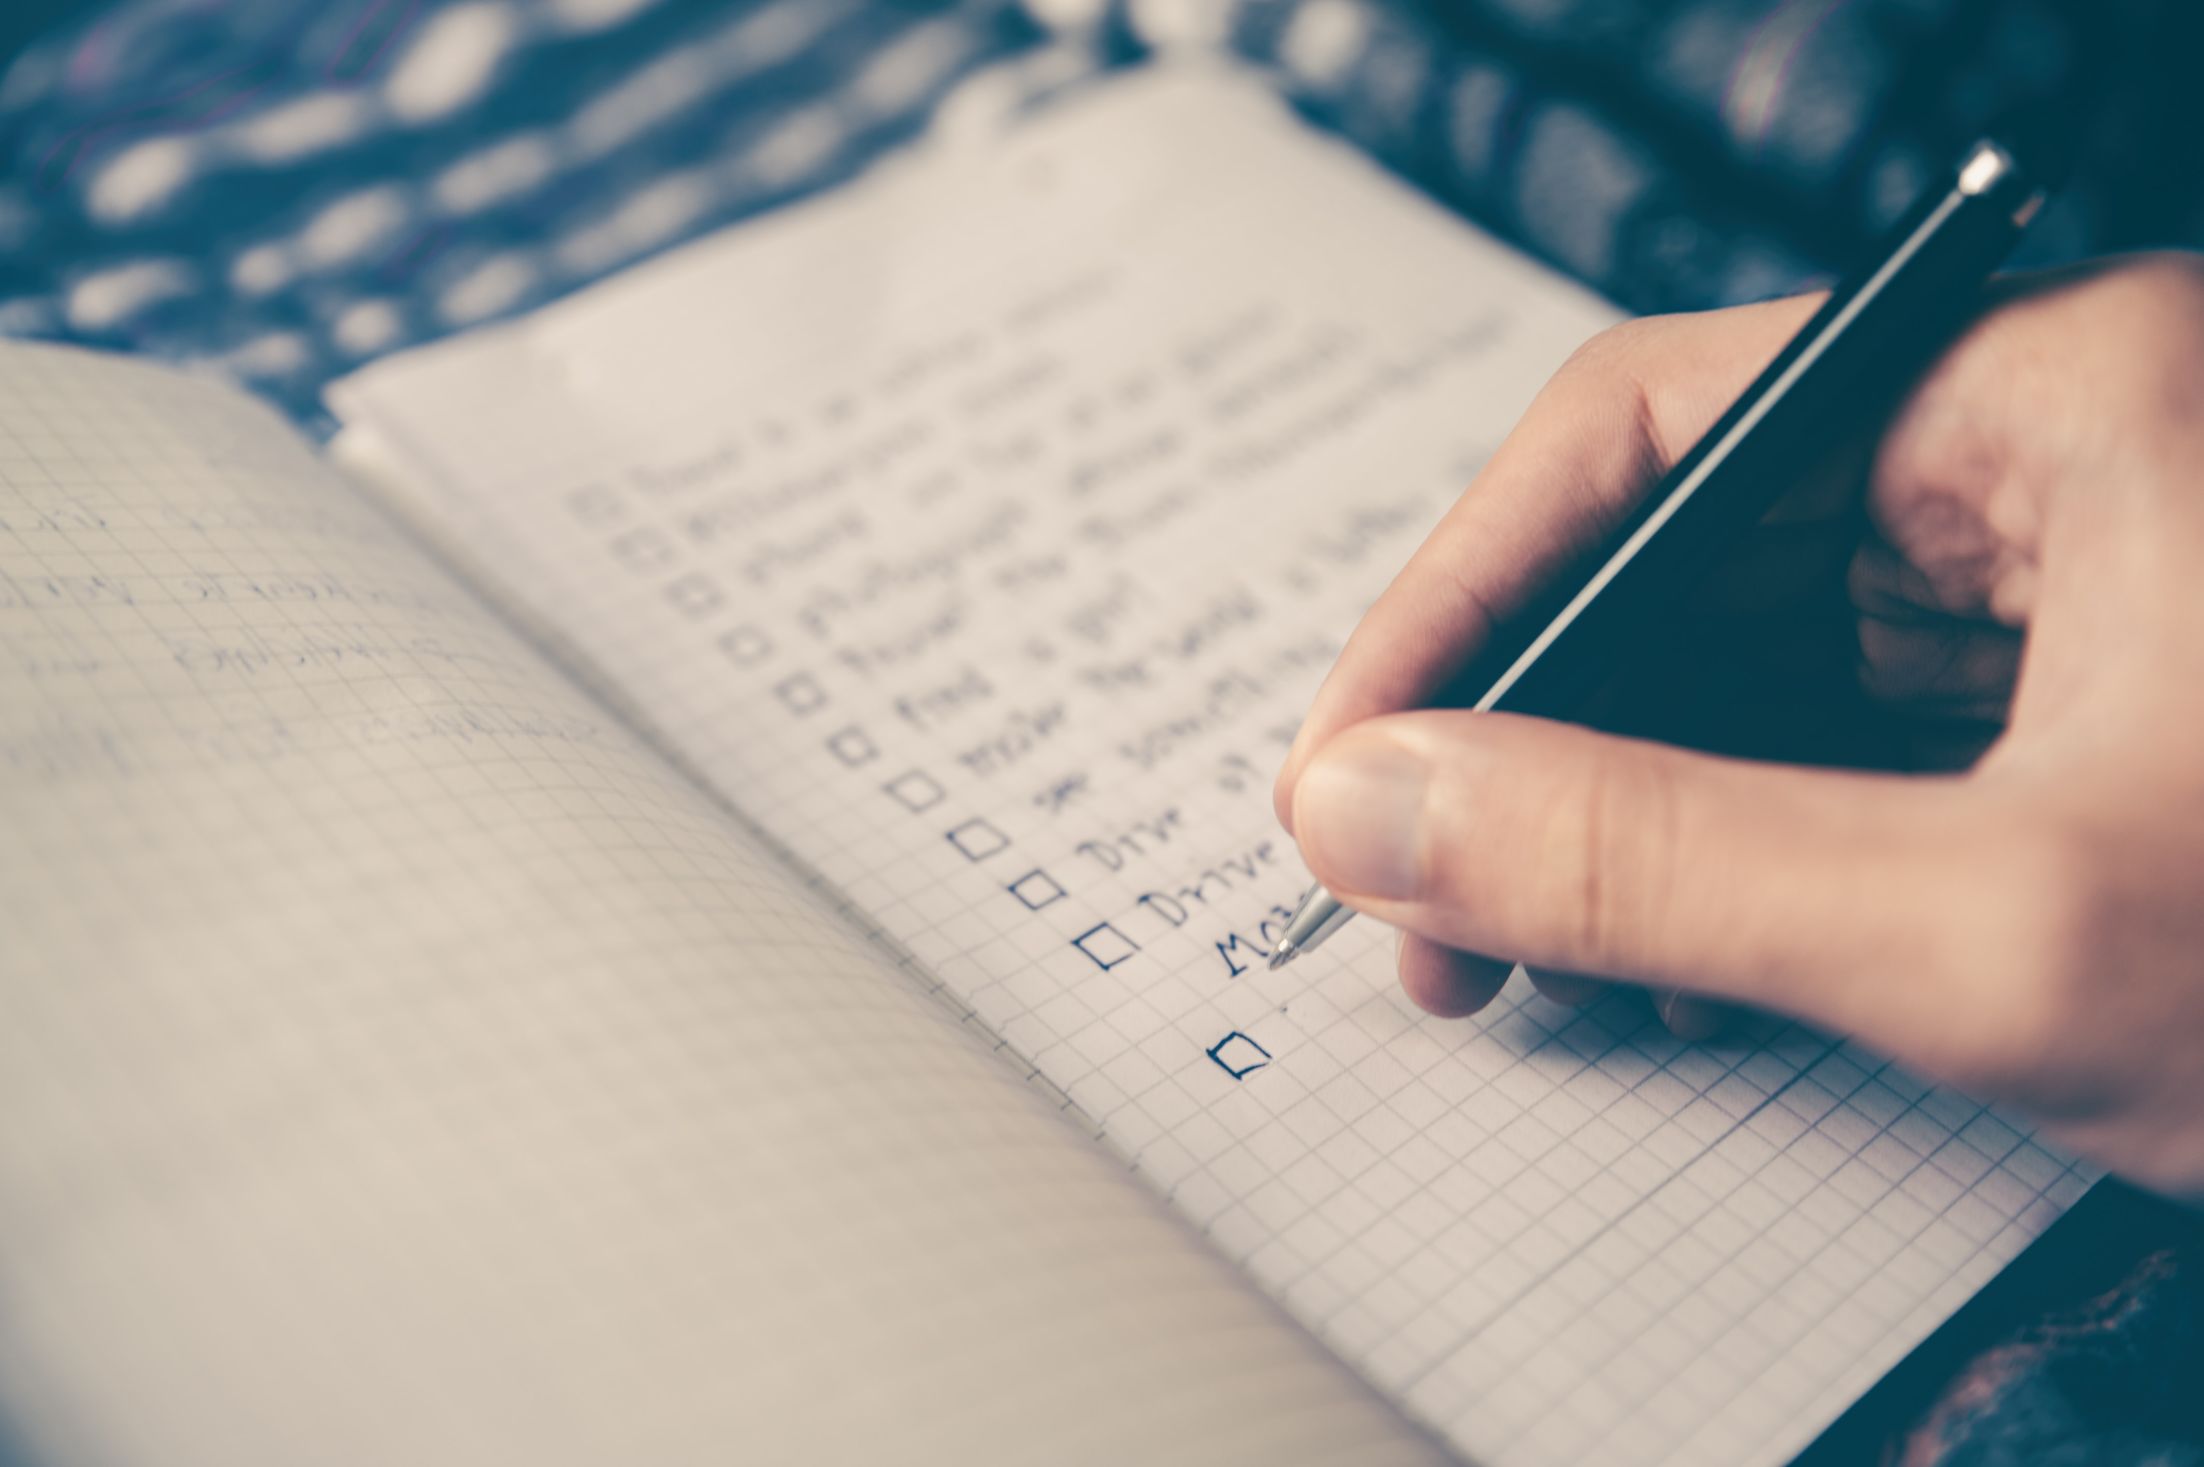 Much To-Do: The Importance of To-Do Lists